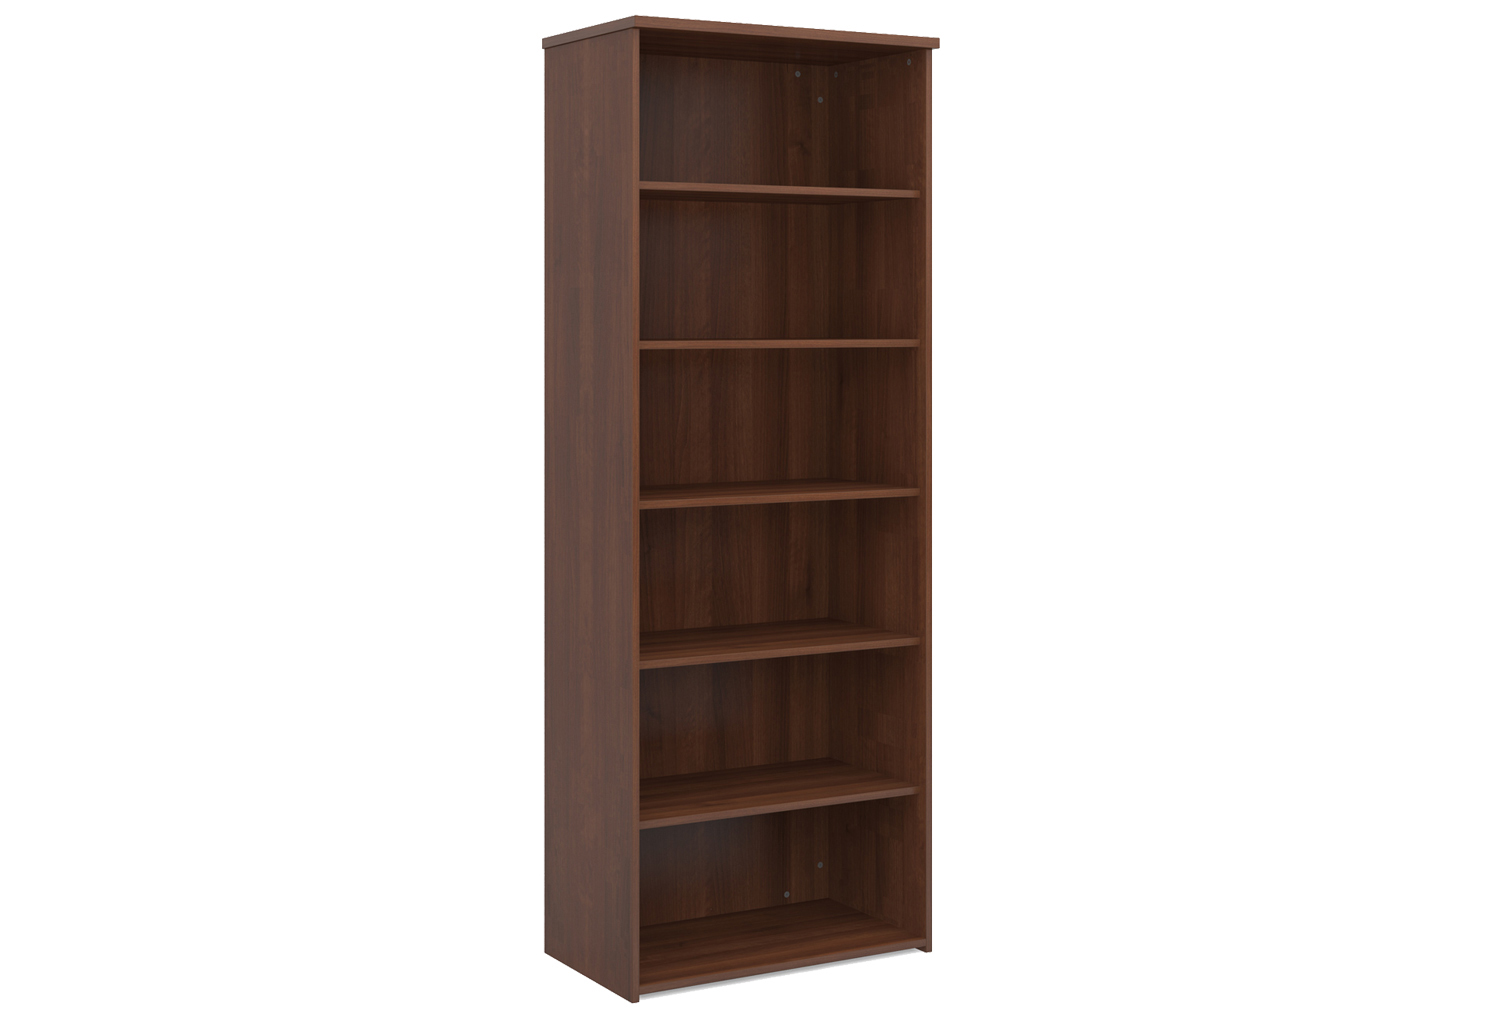 All Walnut Office Bookcases, 5 Shelf - 80wx47dx214h (cm), Express Delivery